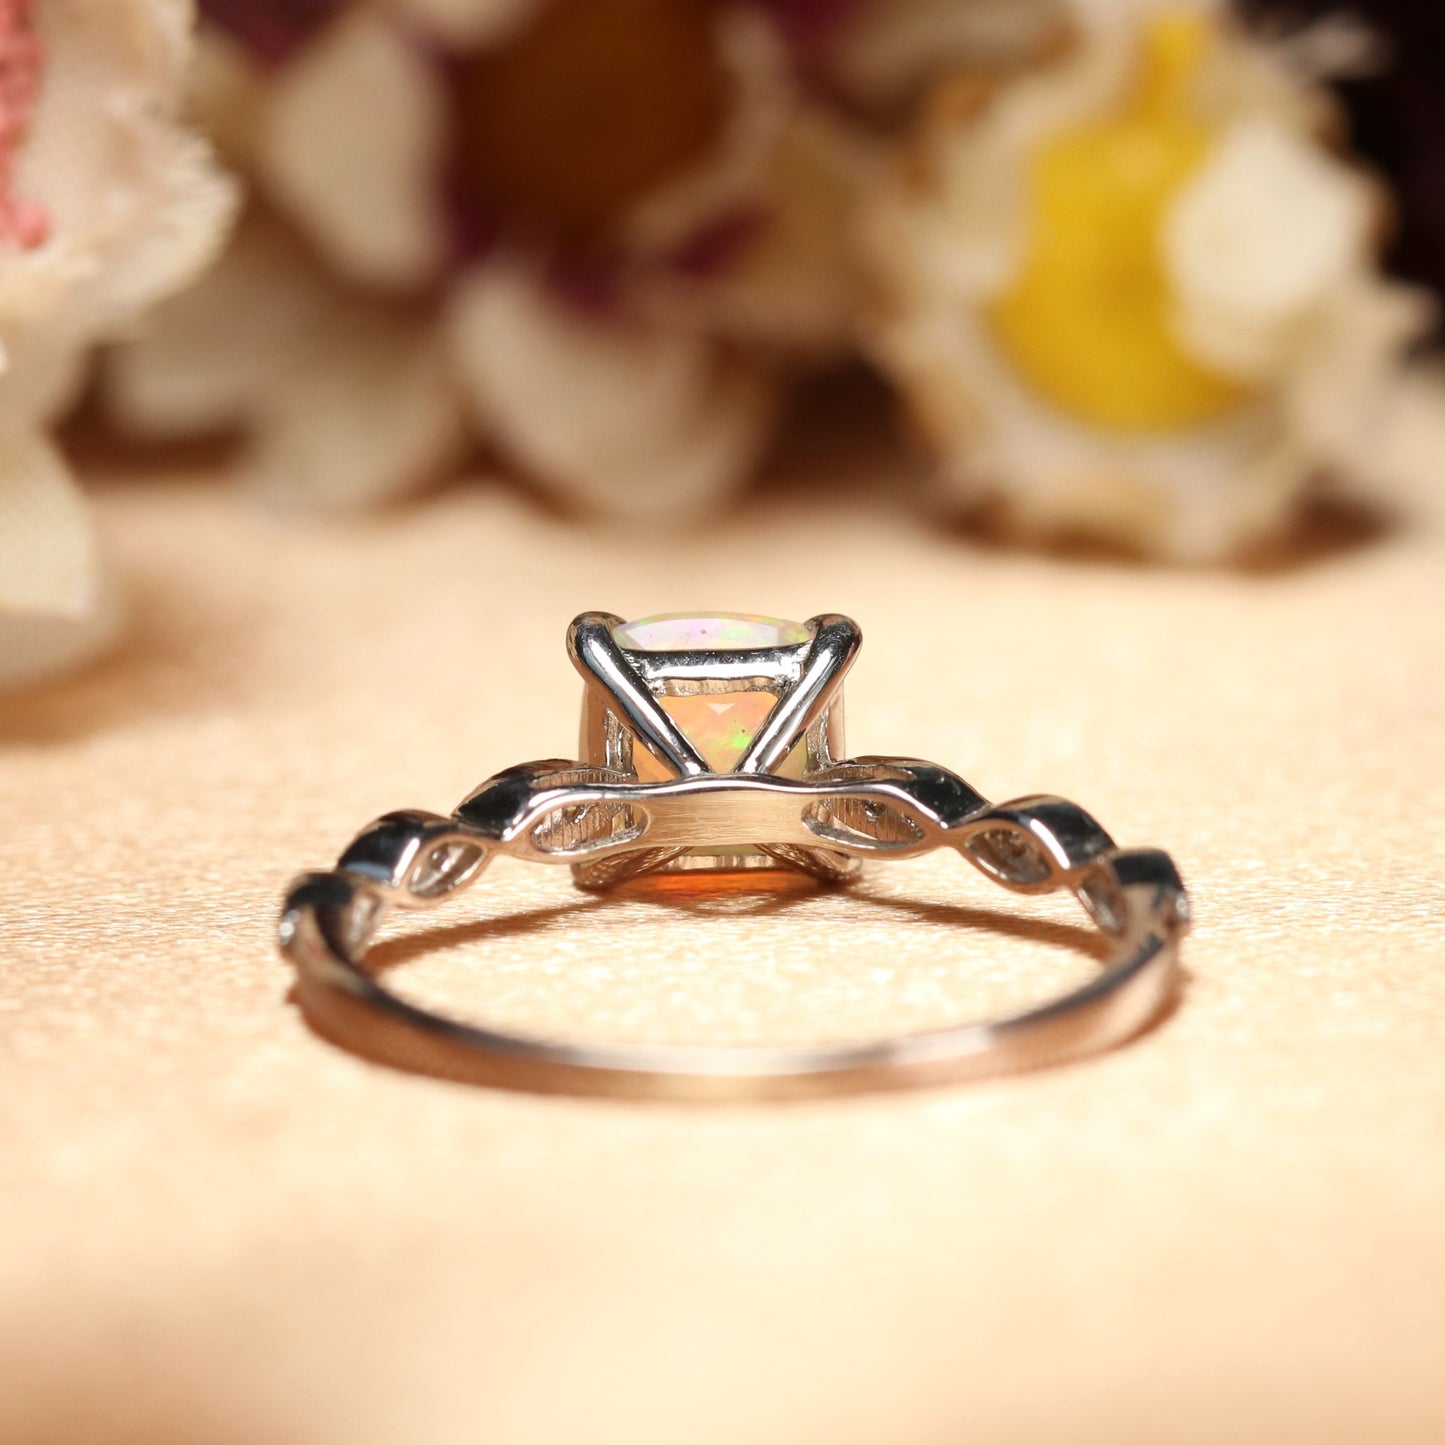 Classic 1.1 Carat Square Princess Cut Fire Opal Engagement Ring in White Gold